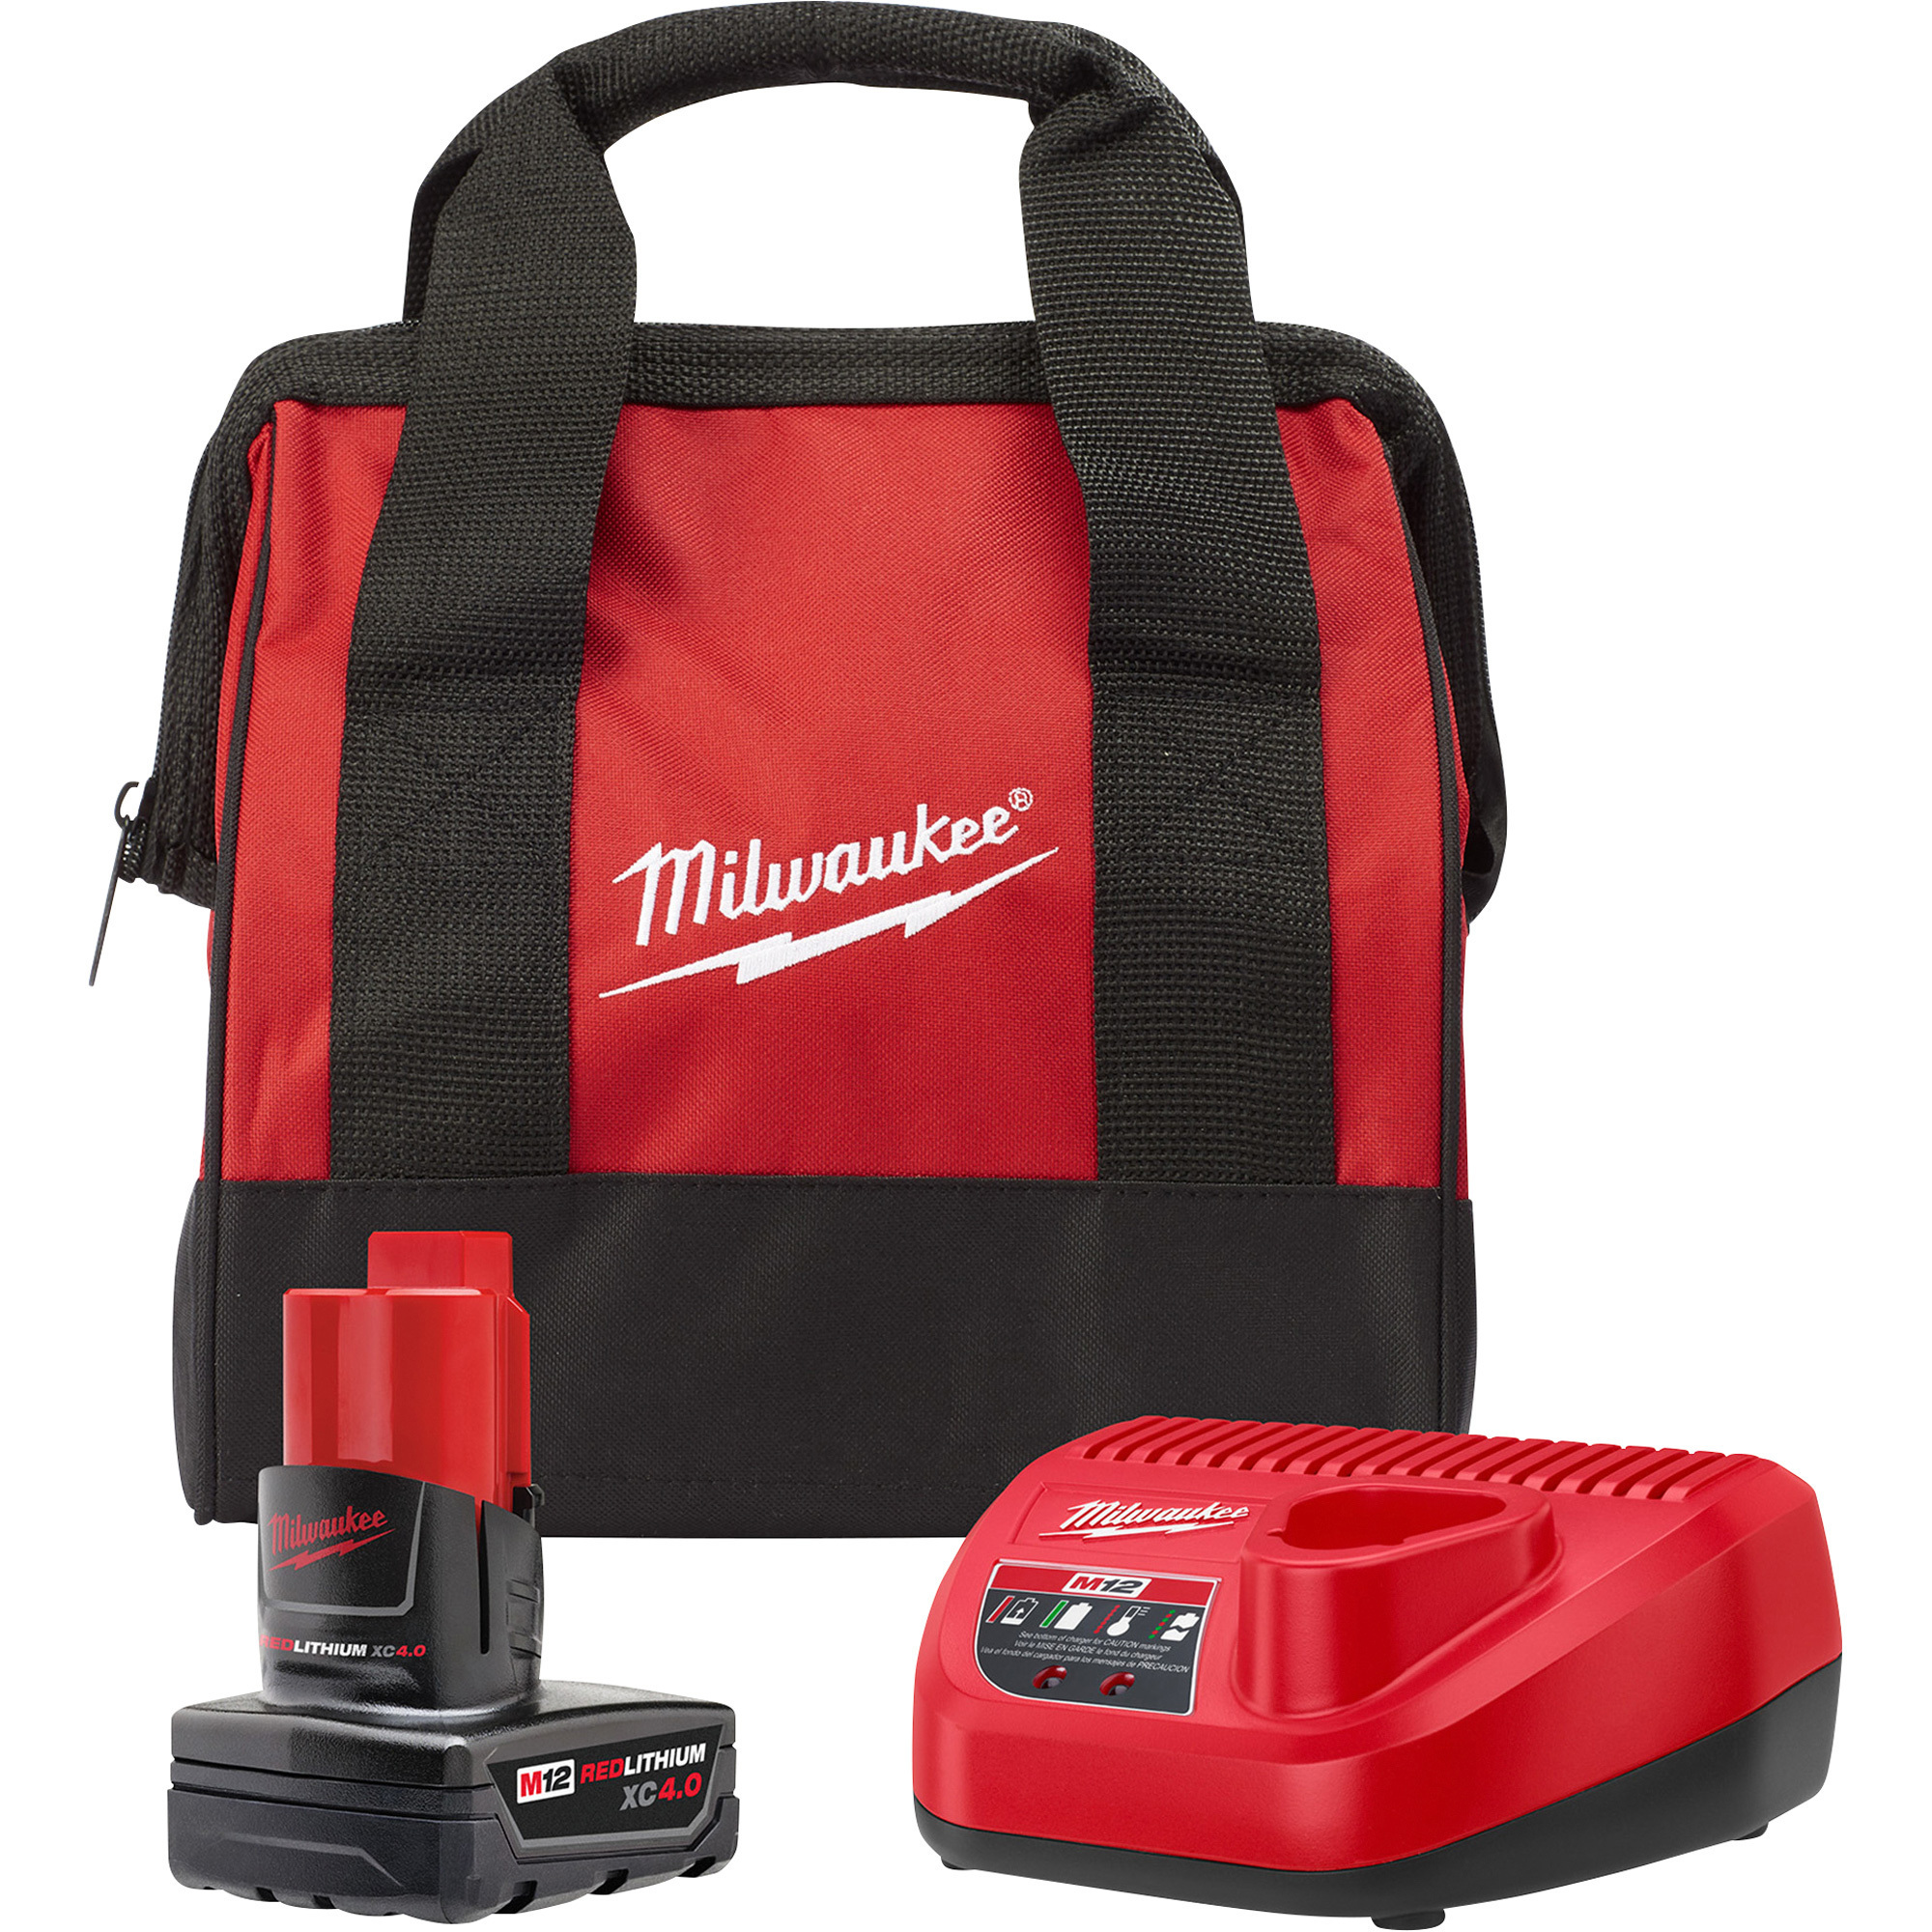 Milwaukee M12 REDLITHIUM XC4.0 Starter Kit, With One Battery, One Charger and Storage Bag, Model 48-59-2440B